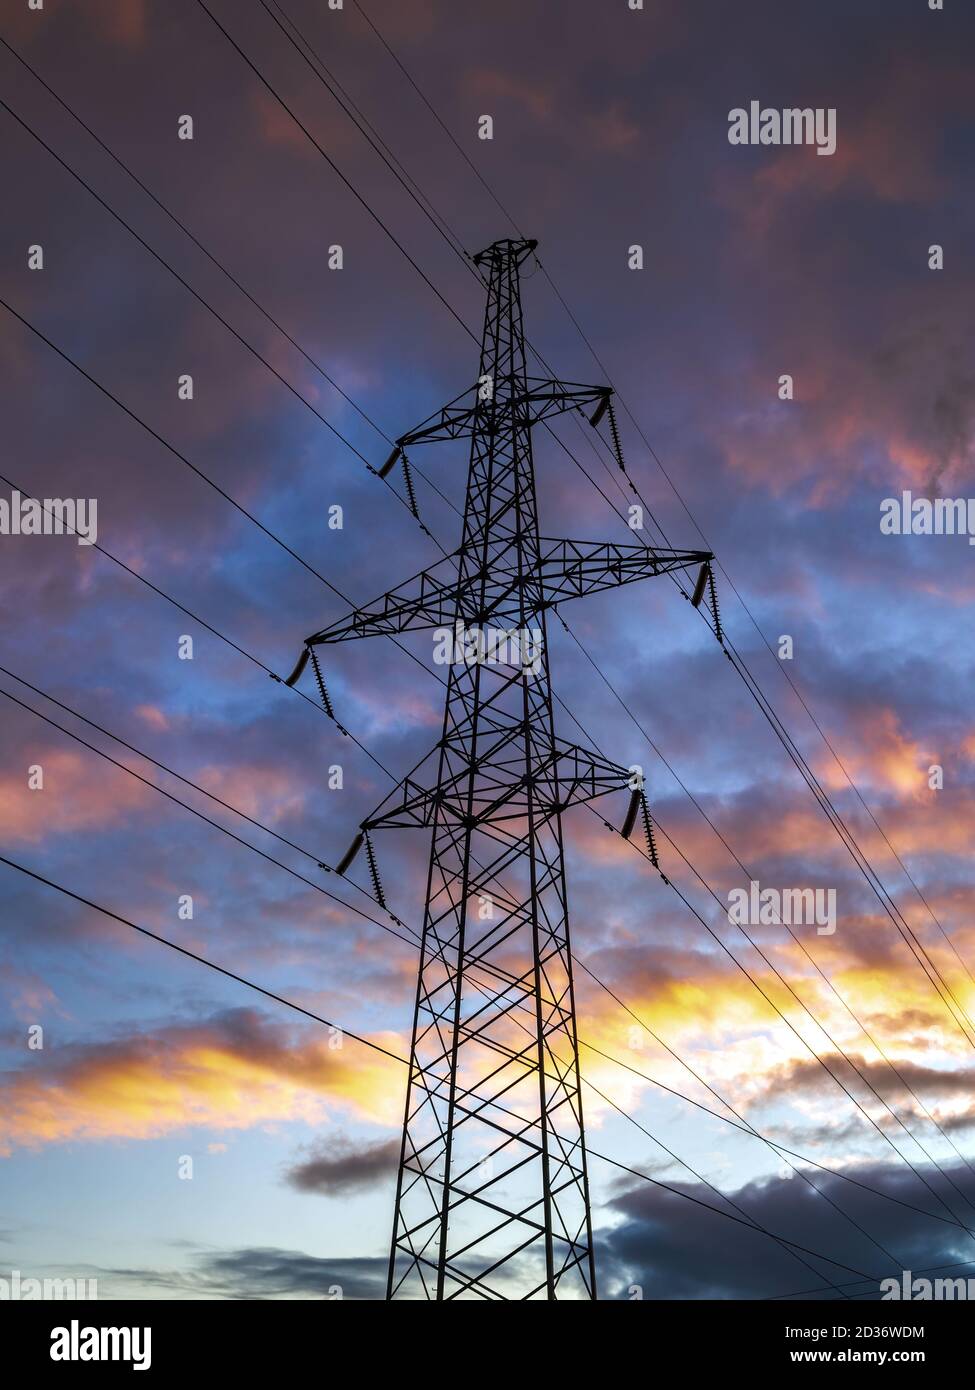 Transmission tower, power tower on dramatic colorful sky background. Steel lattice tower, used to support an overhead power line, vertical view Stock Photo